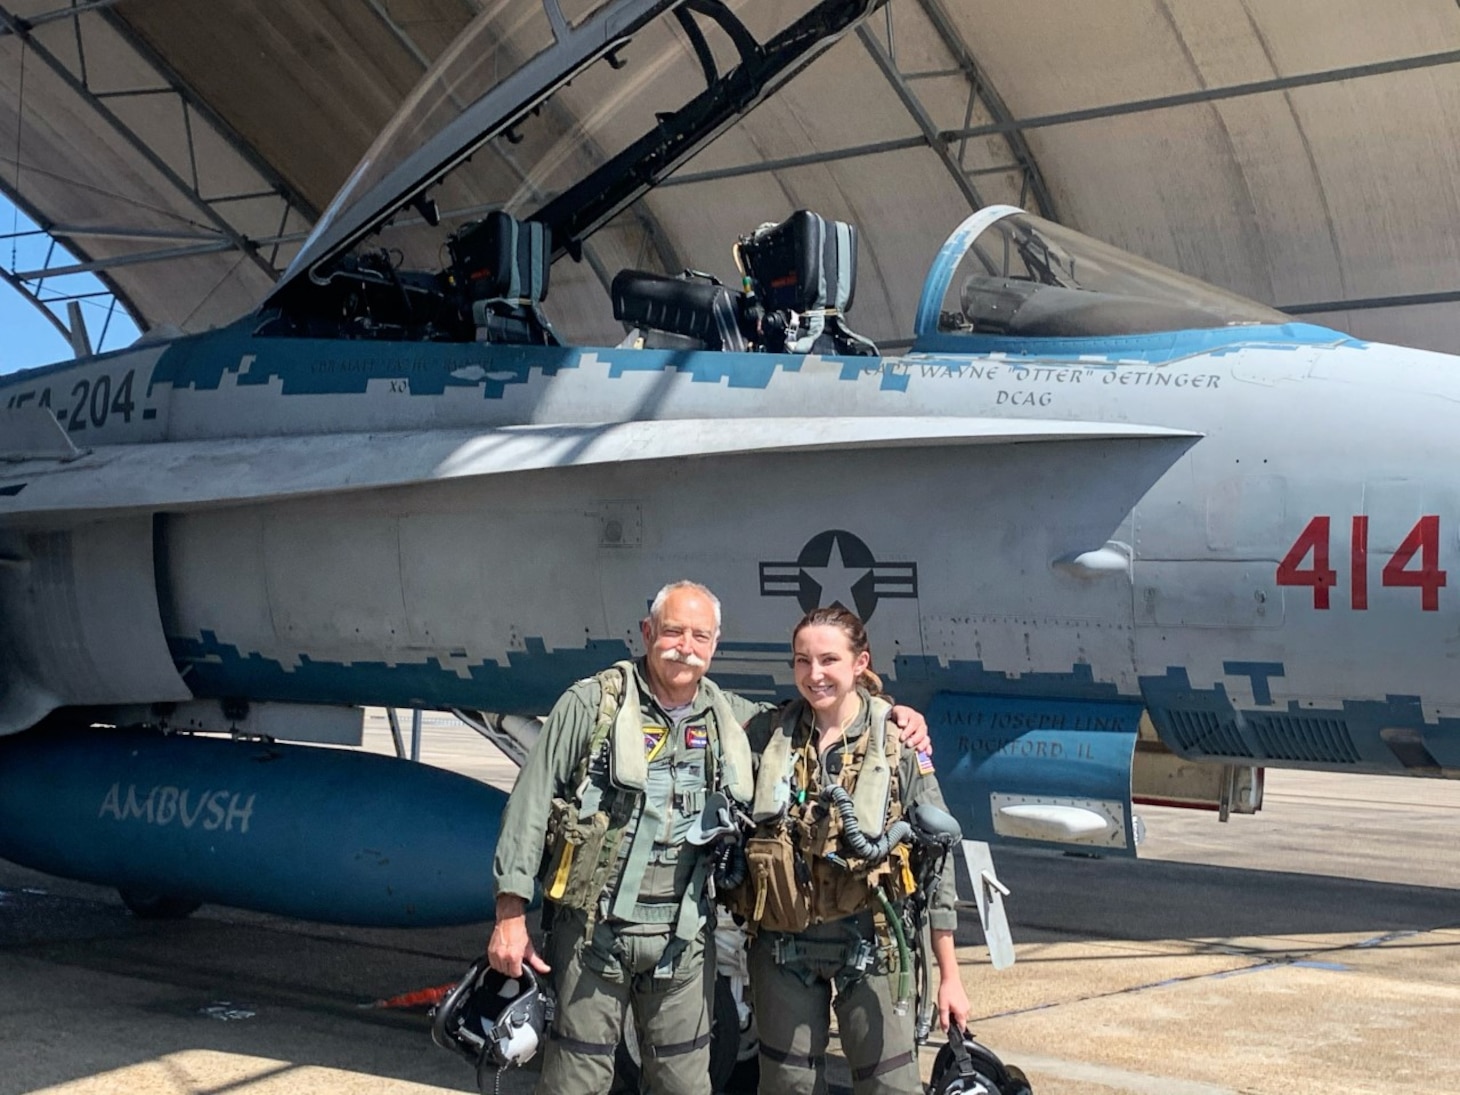 Cmdr. Layne Crowe and his daughter, Lt. Sierra Crowe, were able to fly side-by-side this past April in New Orleans with Fighter Attack Squadron (VFA) 204, a Navy Reserve adversary squadron operating the F/A-18 Hornet, making for one of the most memorable father-daughter experiences the two have shared.